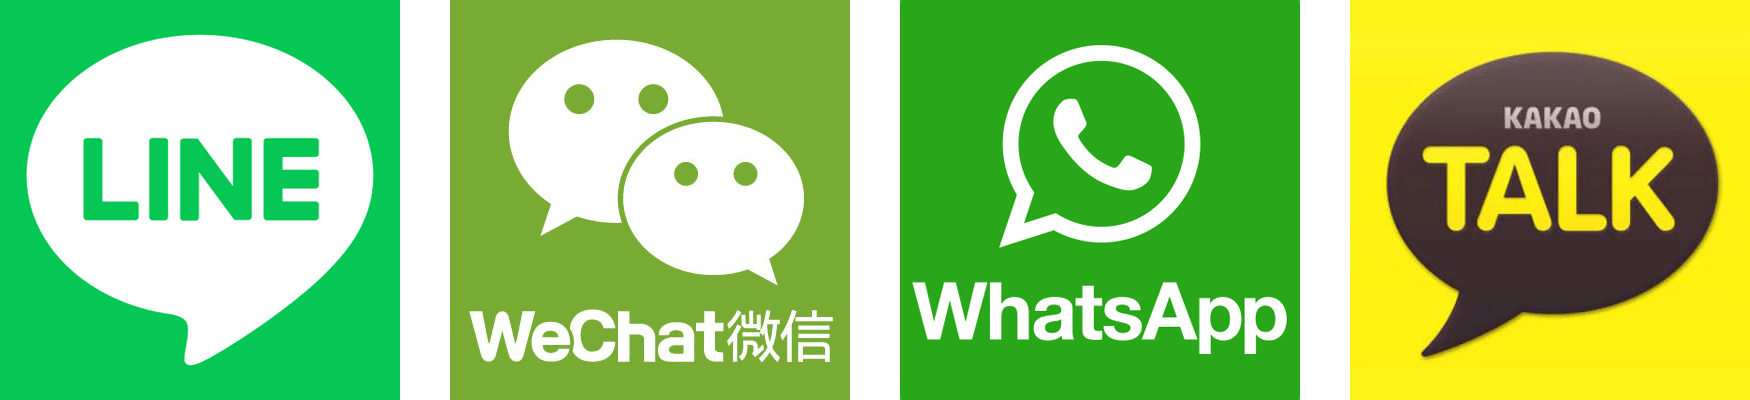 chat apps